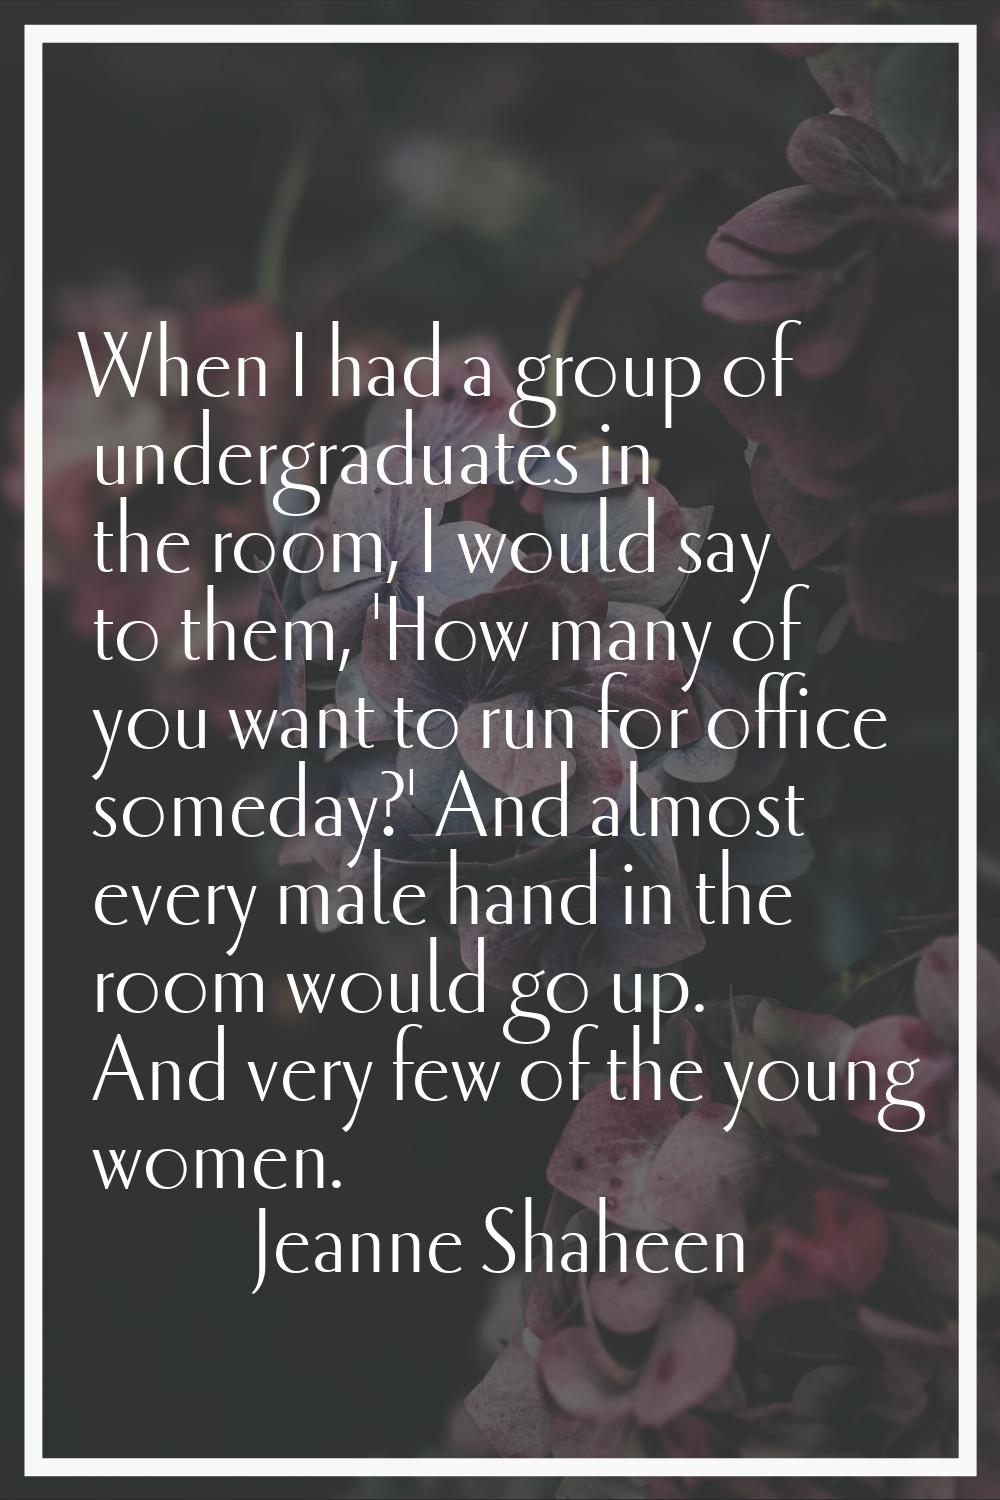 When I had a group of undergraduates in the room, I would say to them, 'How many of you want to run